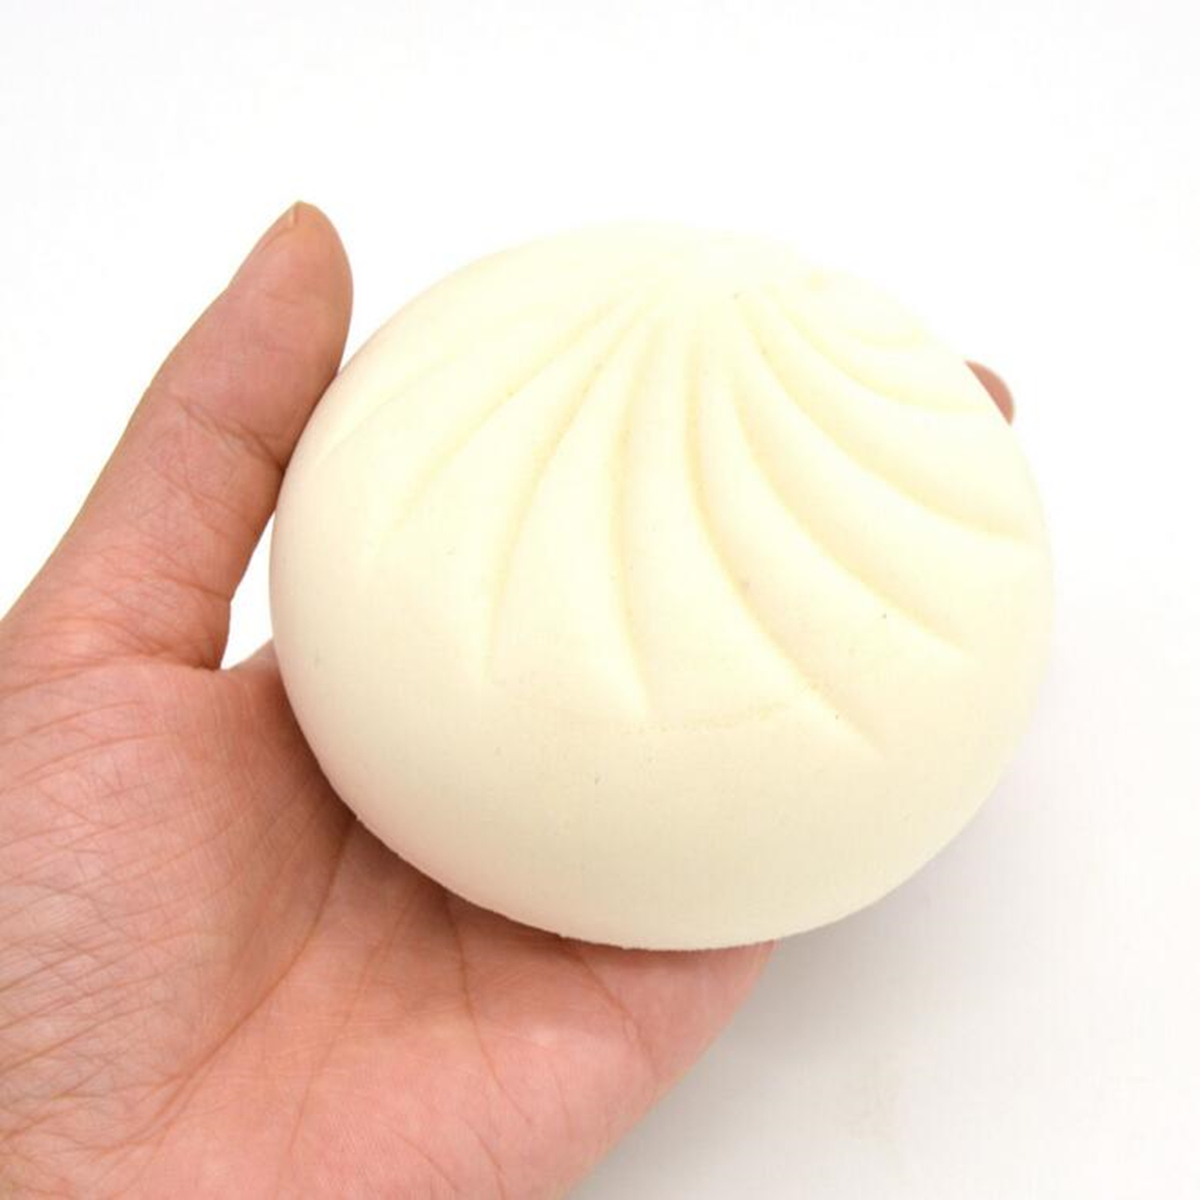 

6cm Jumbo Bun Squishy Slow Rising Simulation Food Bread Fun Collectibles Pressure Release Phone Toy